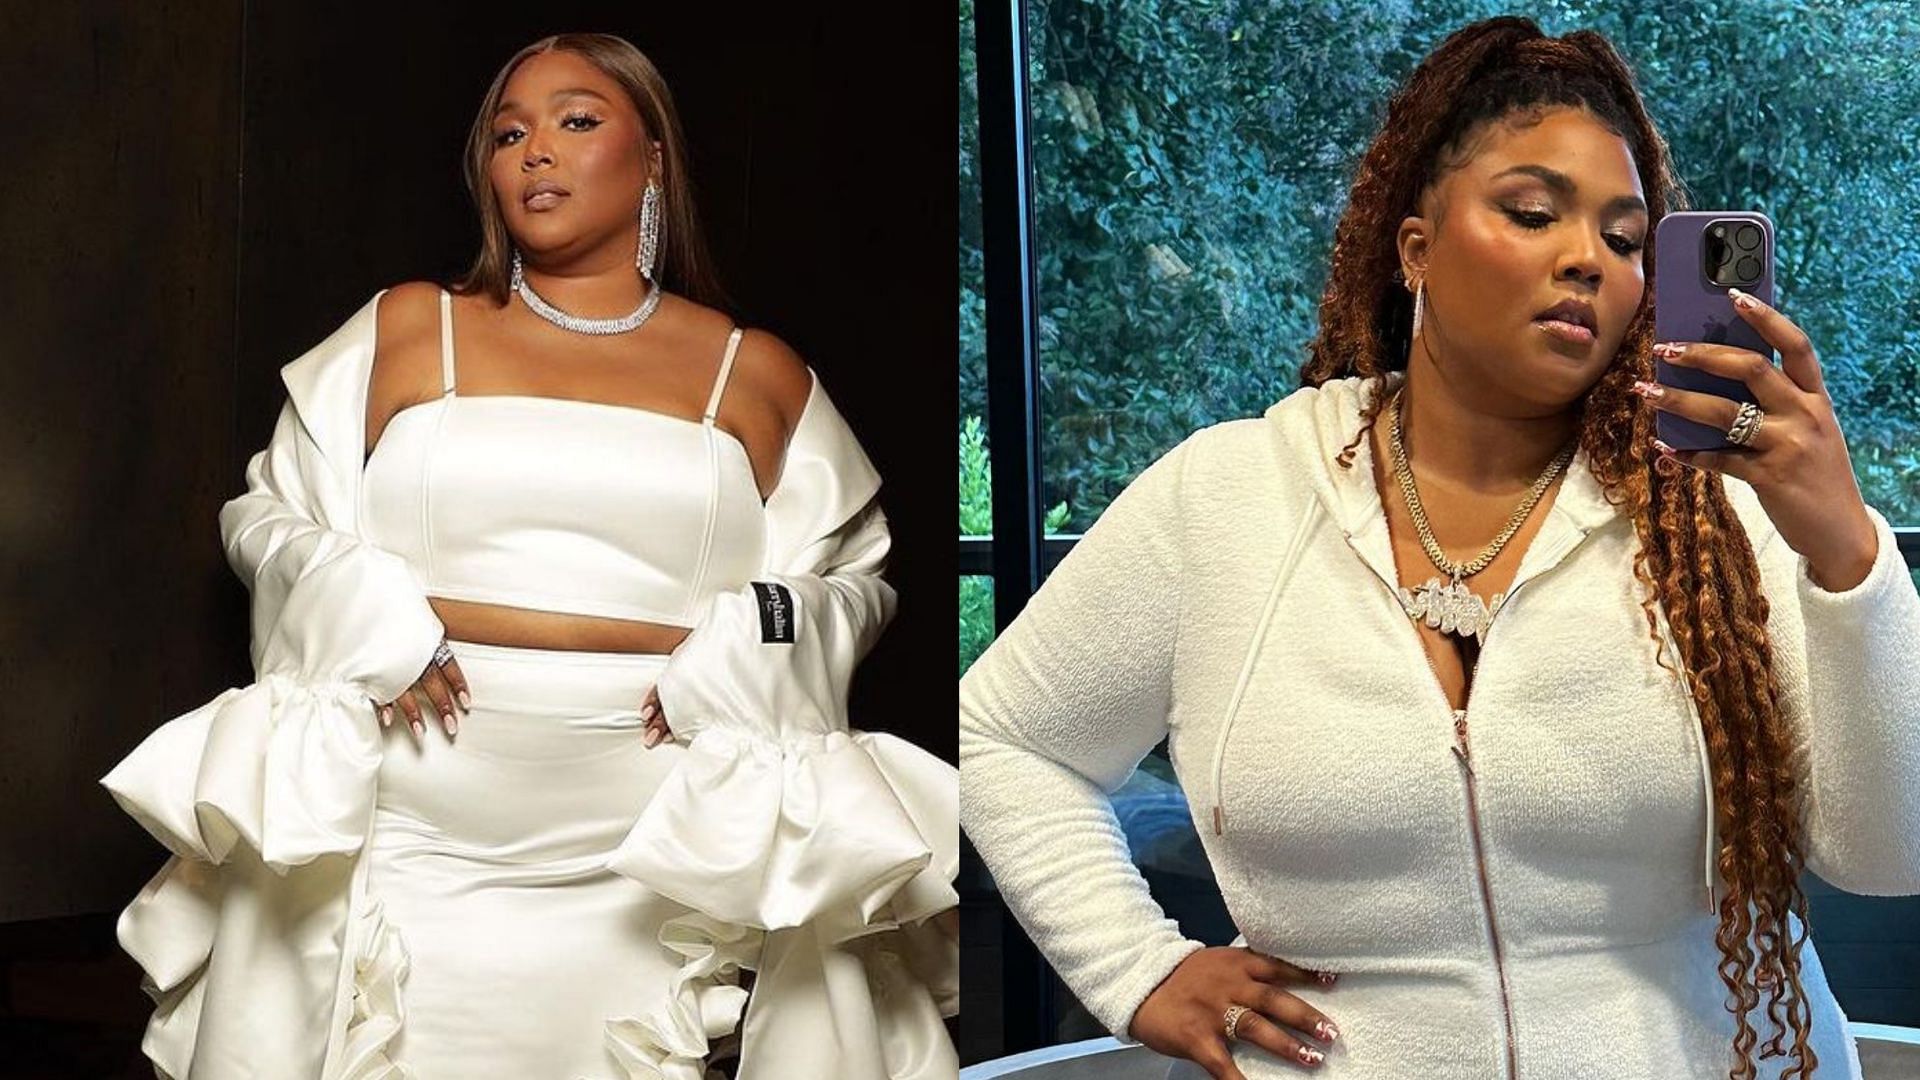 Lizzo has been accused by her former background dancers  of improper conduct (Image via Instagram / lizzobeeating)